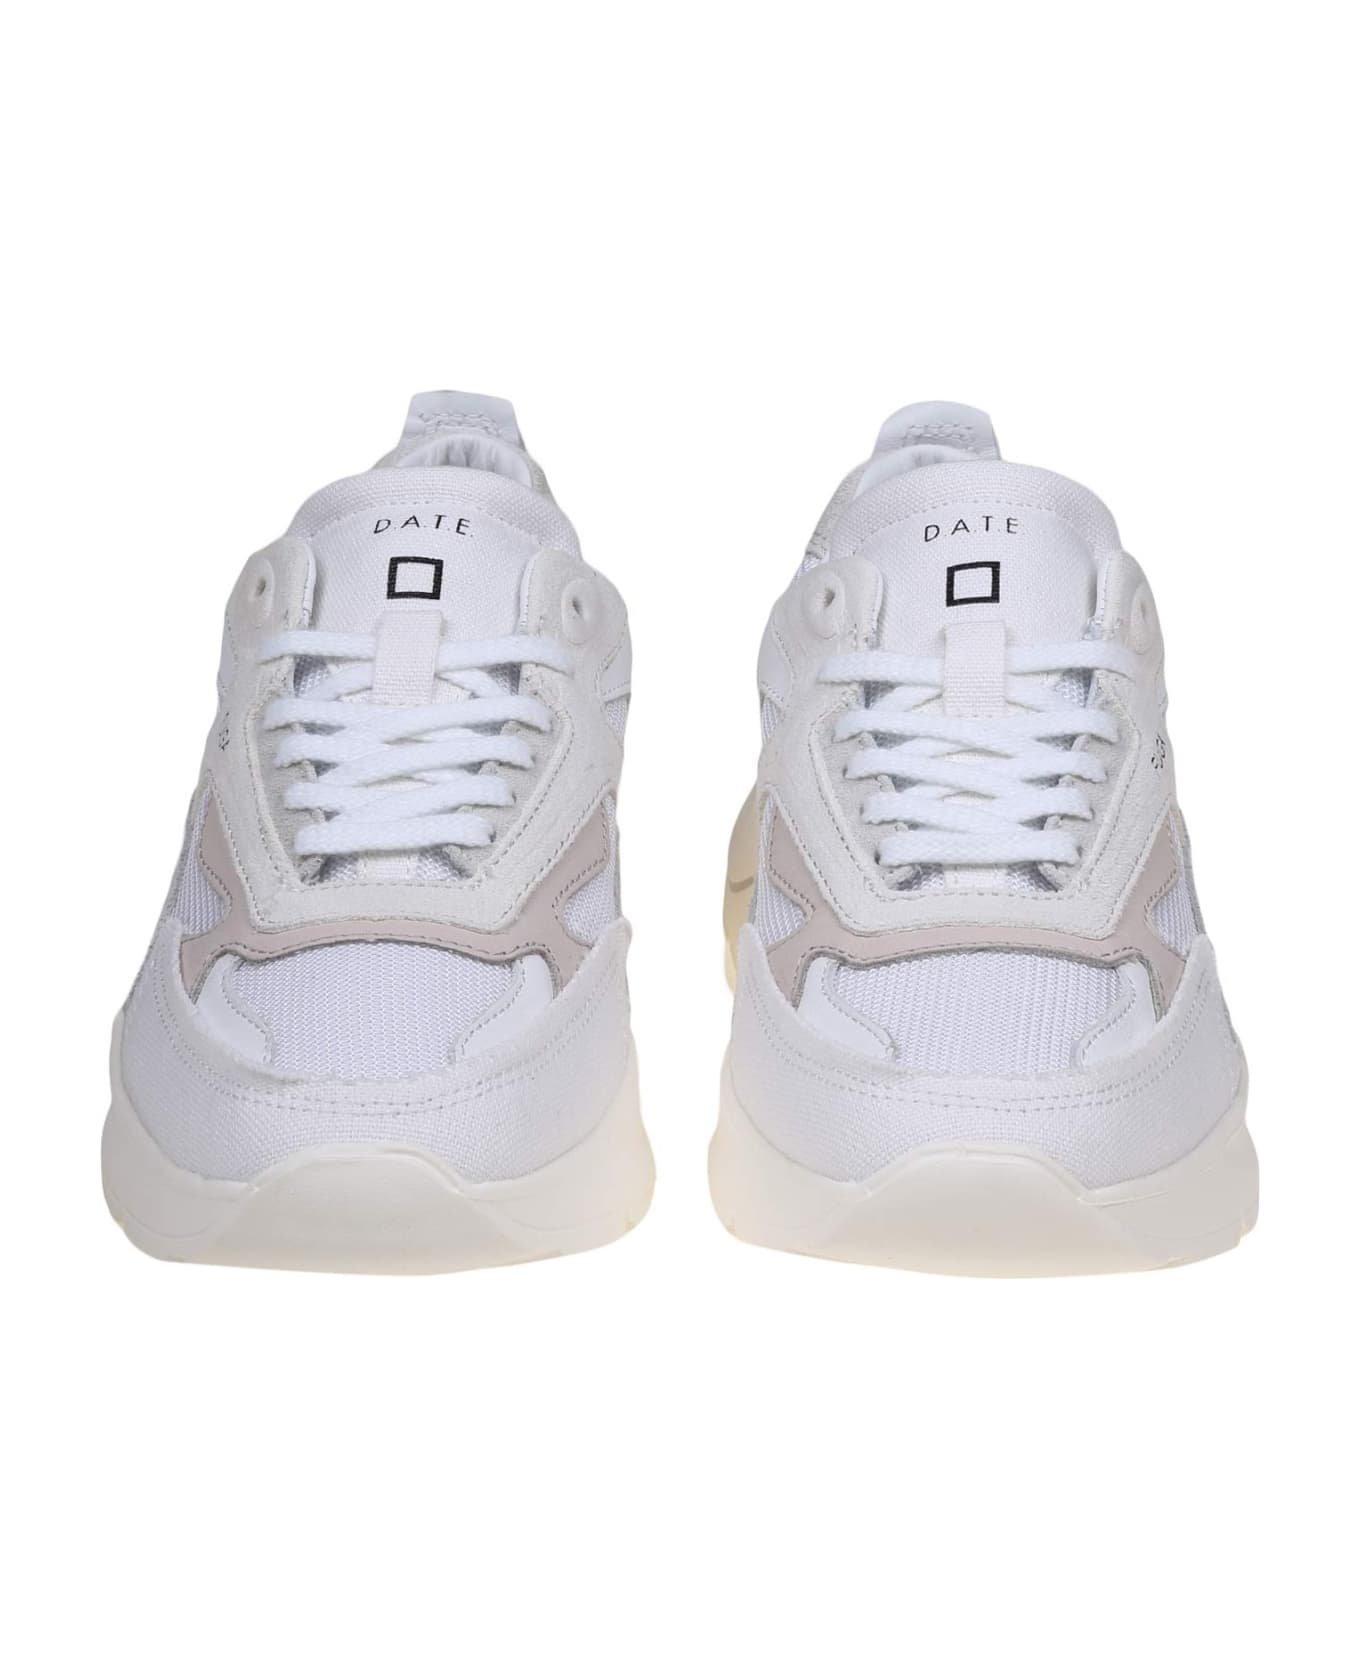 D.A.T.E. Fuga Sneakers In White balance And Fabric - White